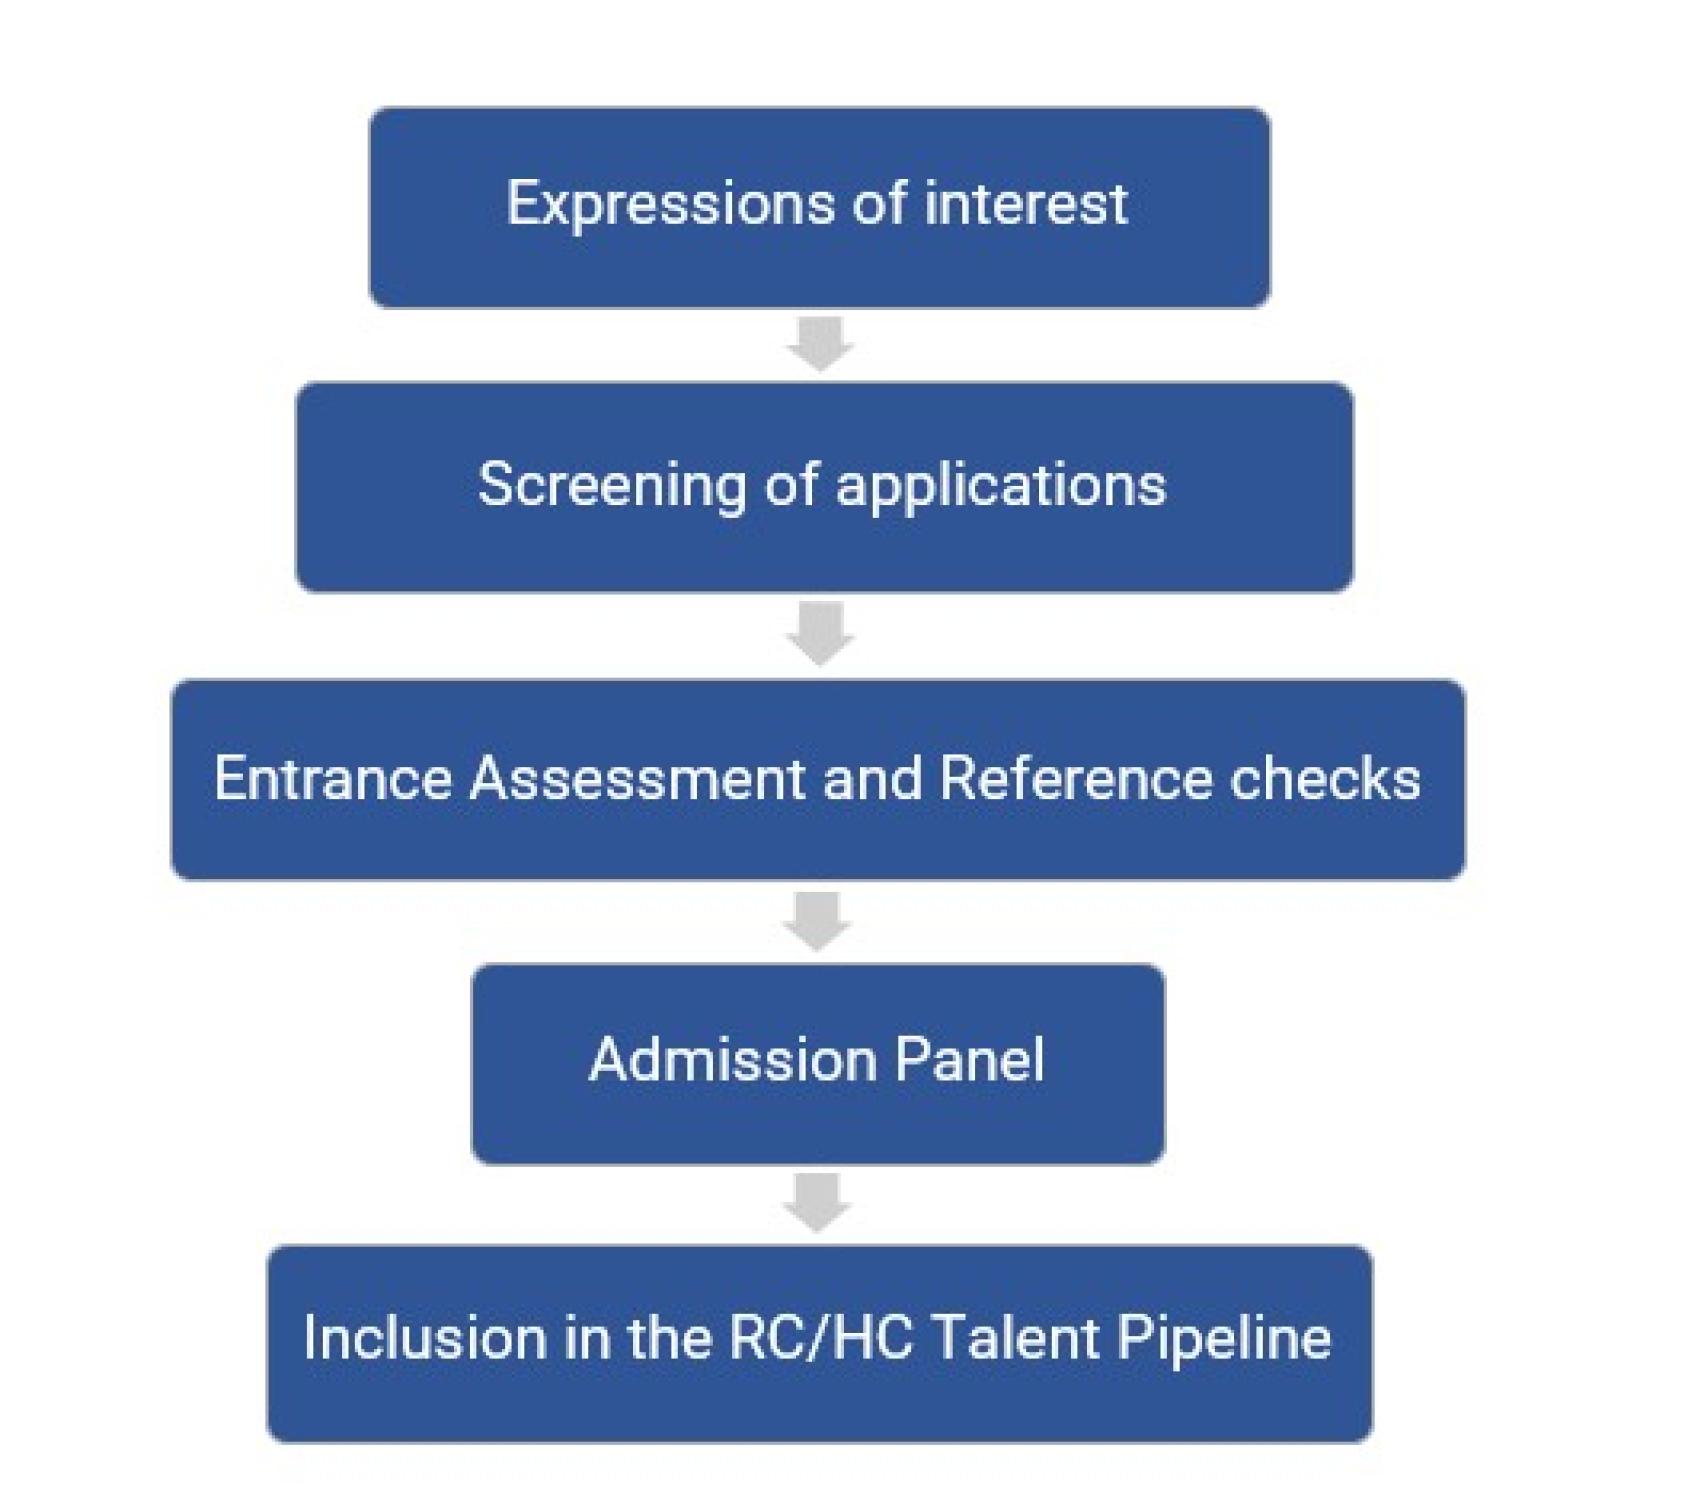 this graph shows the steps to reach the RC/HC Talent Pipeline from the application satge